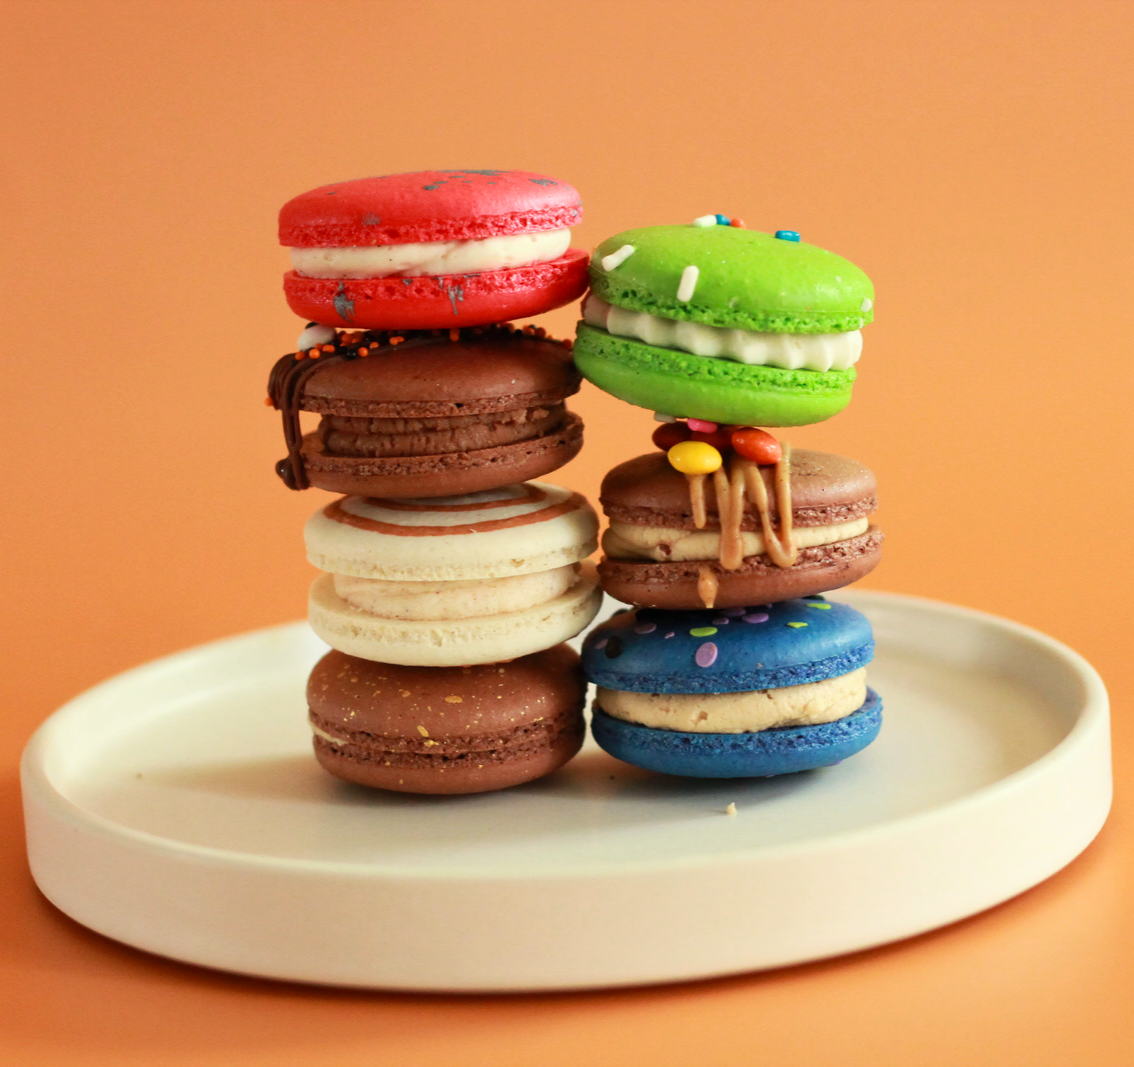 Little Crumby Bakeshop in Haverhill, Ma provides custom French Macarons for any all occassions or simply just because.